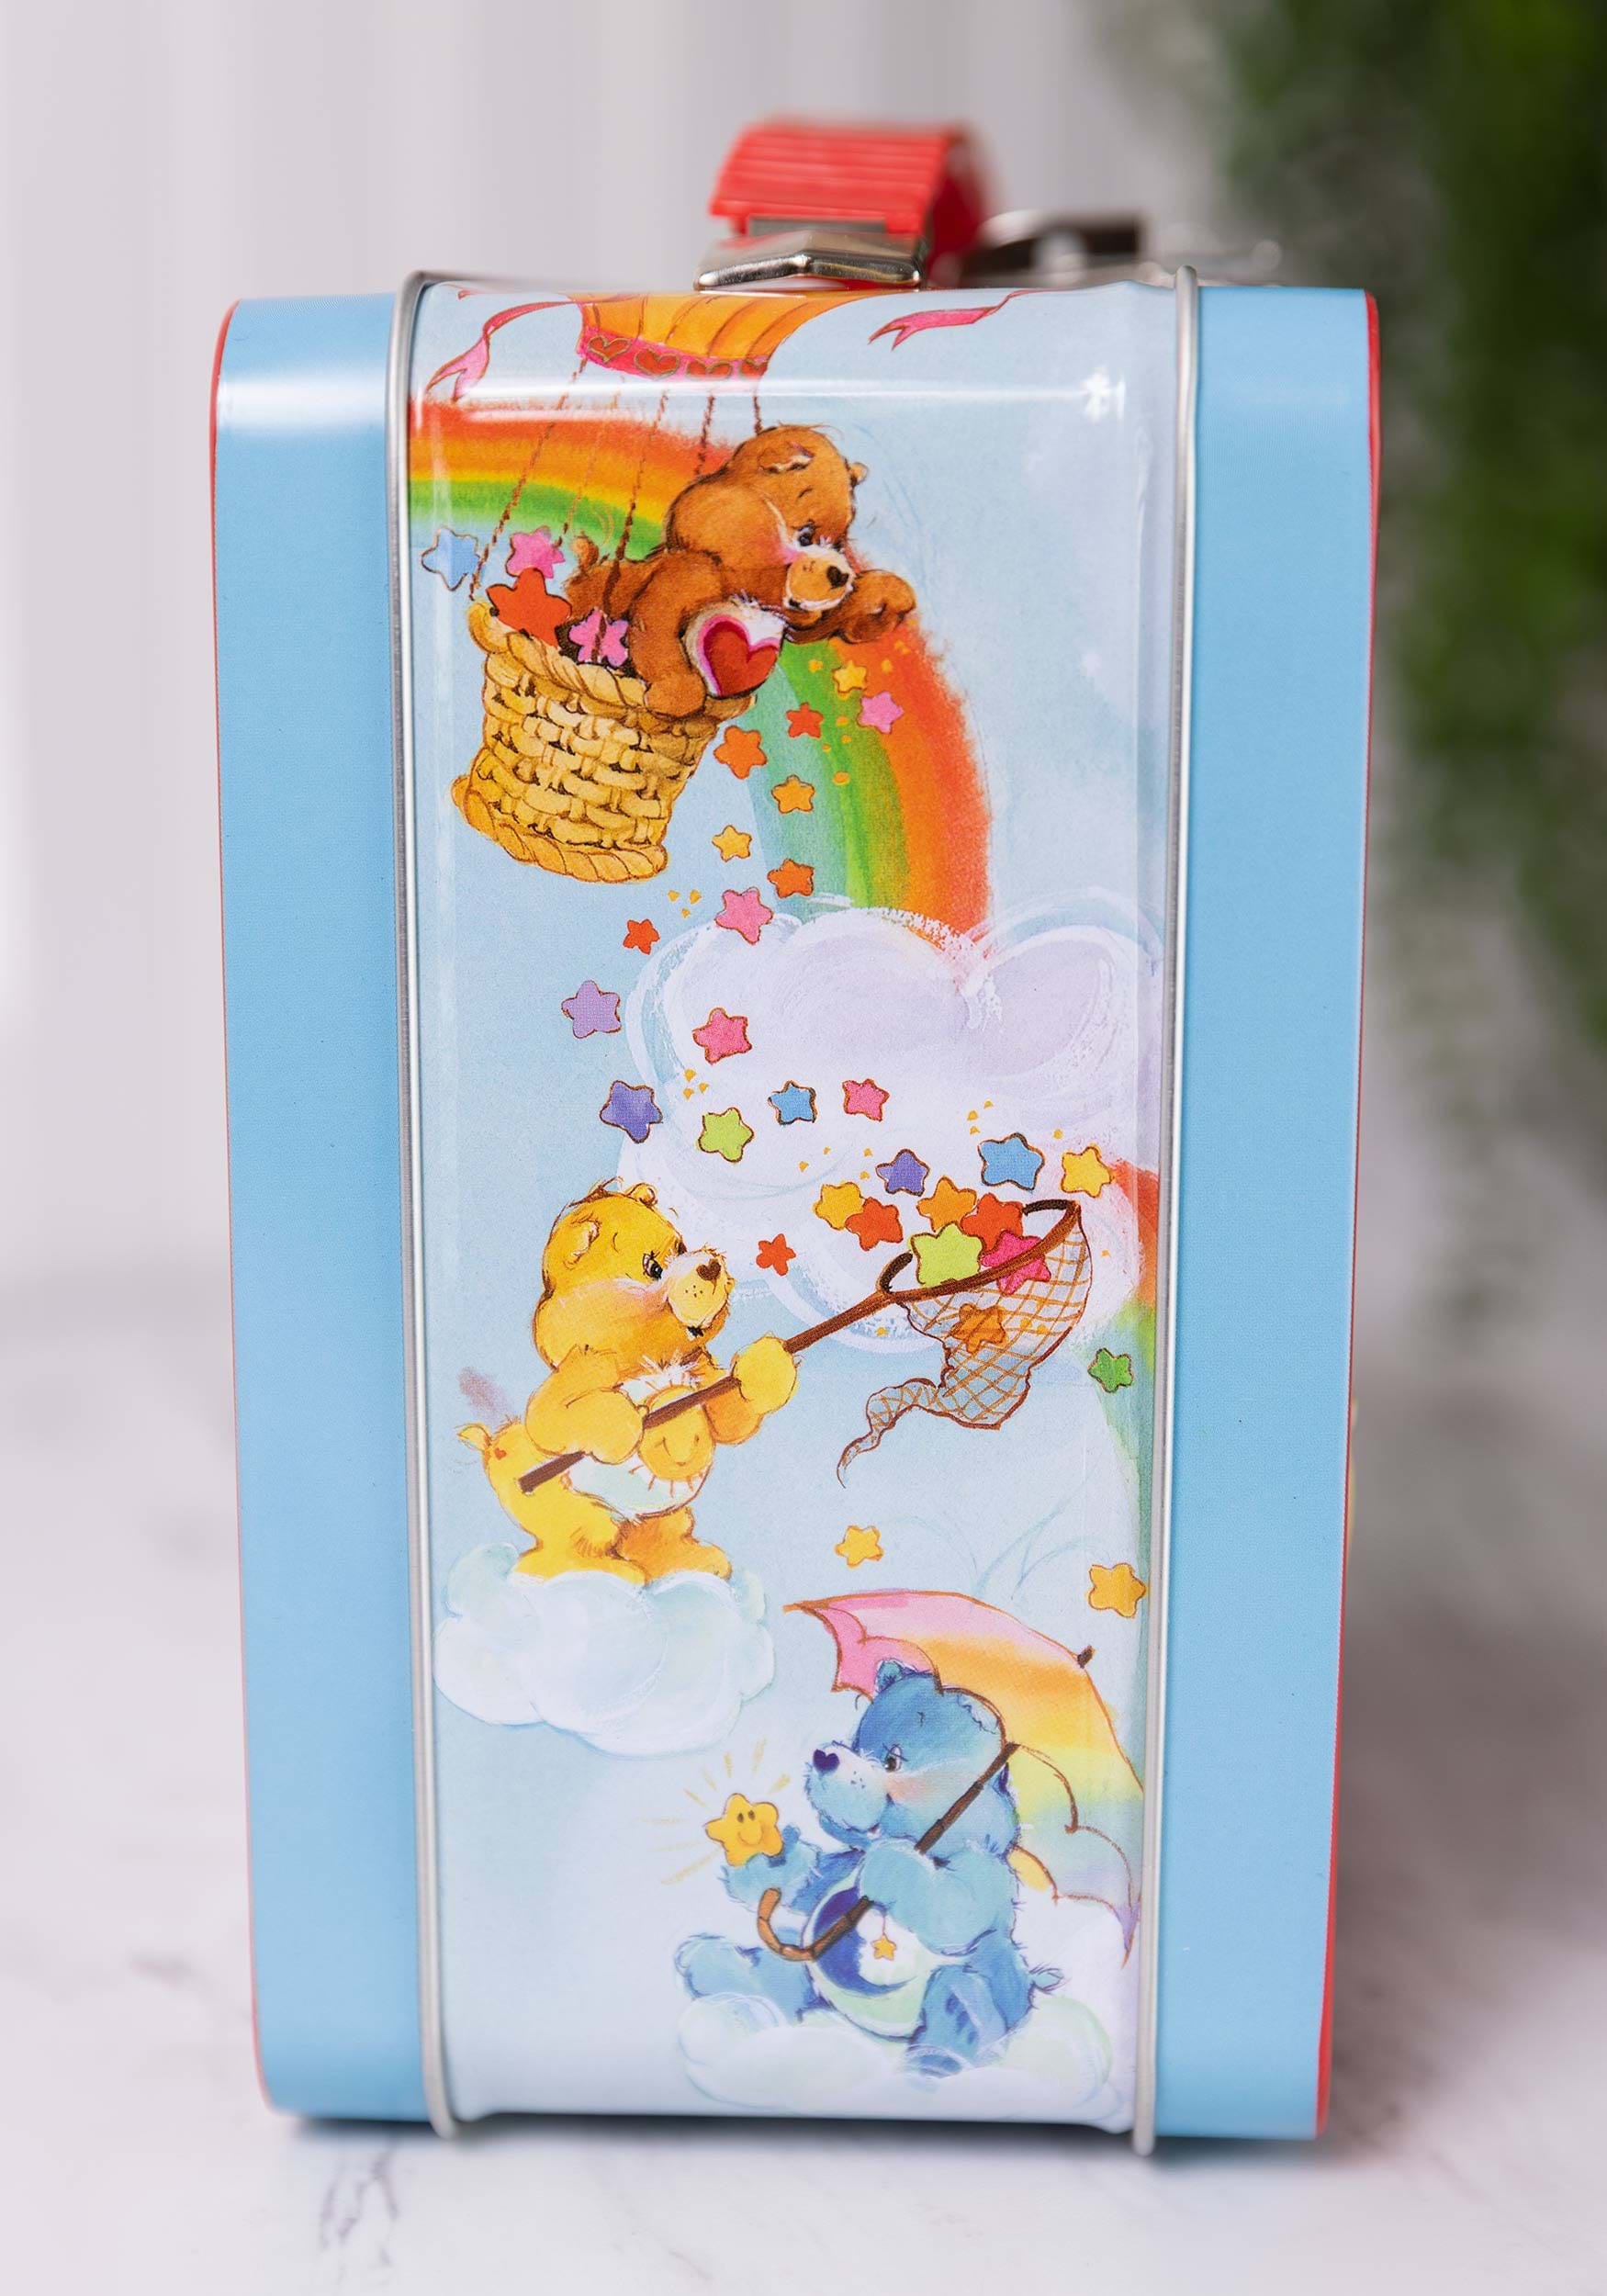 https://images.fun.com/products/83688/2-1-260813/care-bears-metal-lunch-box-alt-3.jpg